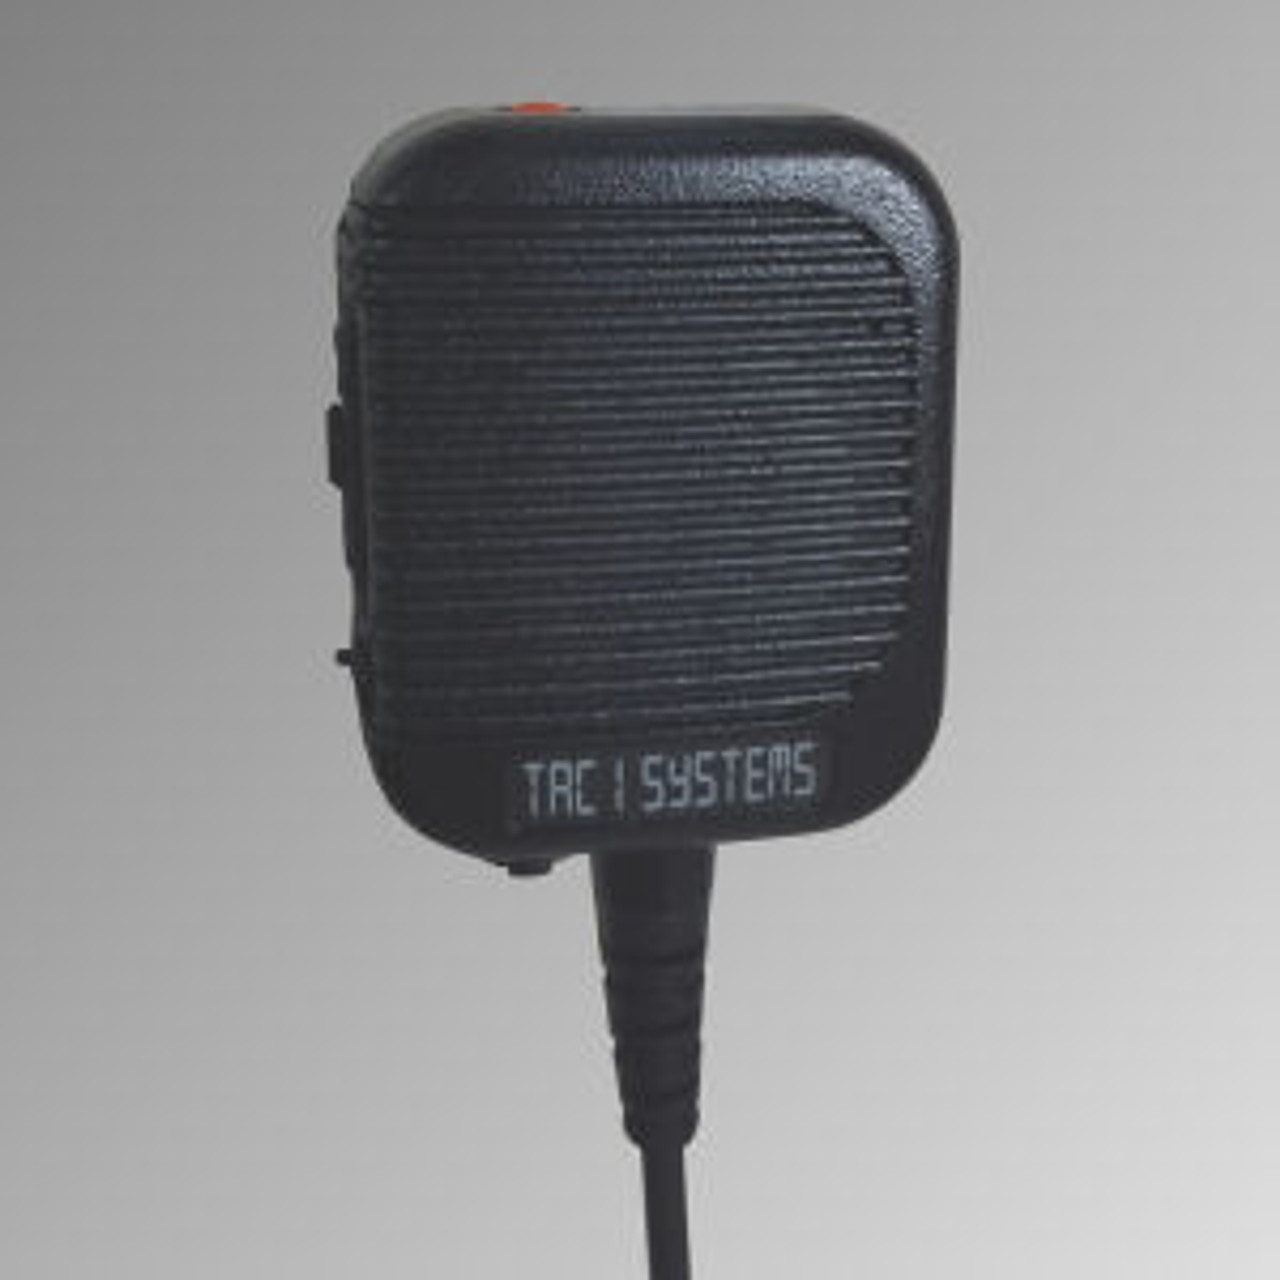 TAC 1 Systems IP67 E-Button Mic. Replaces Harris part number XR-AE6A